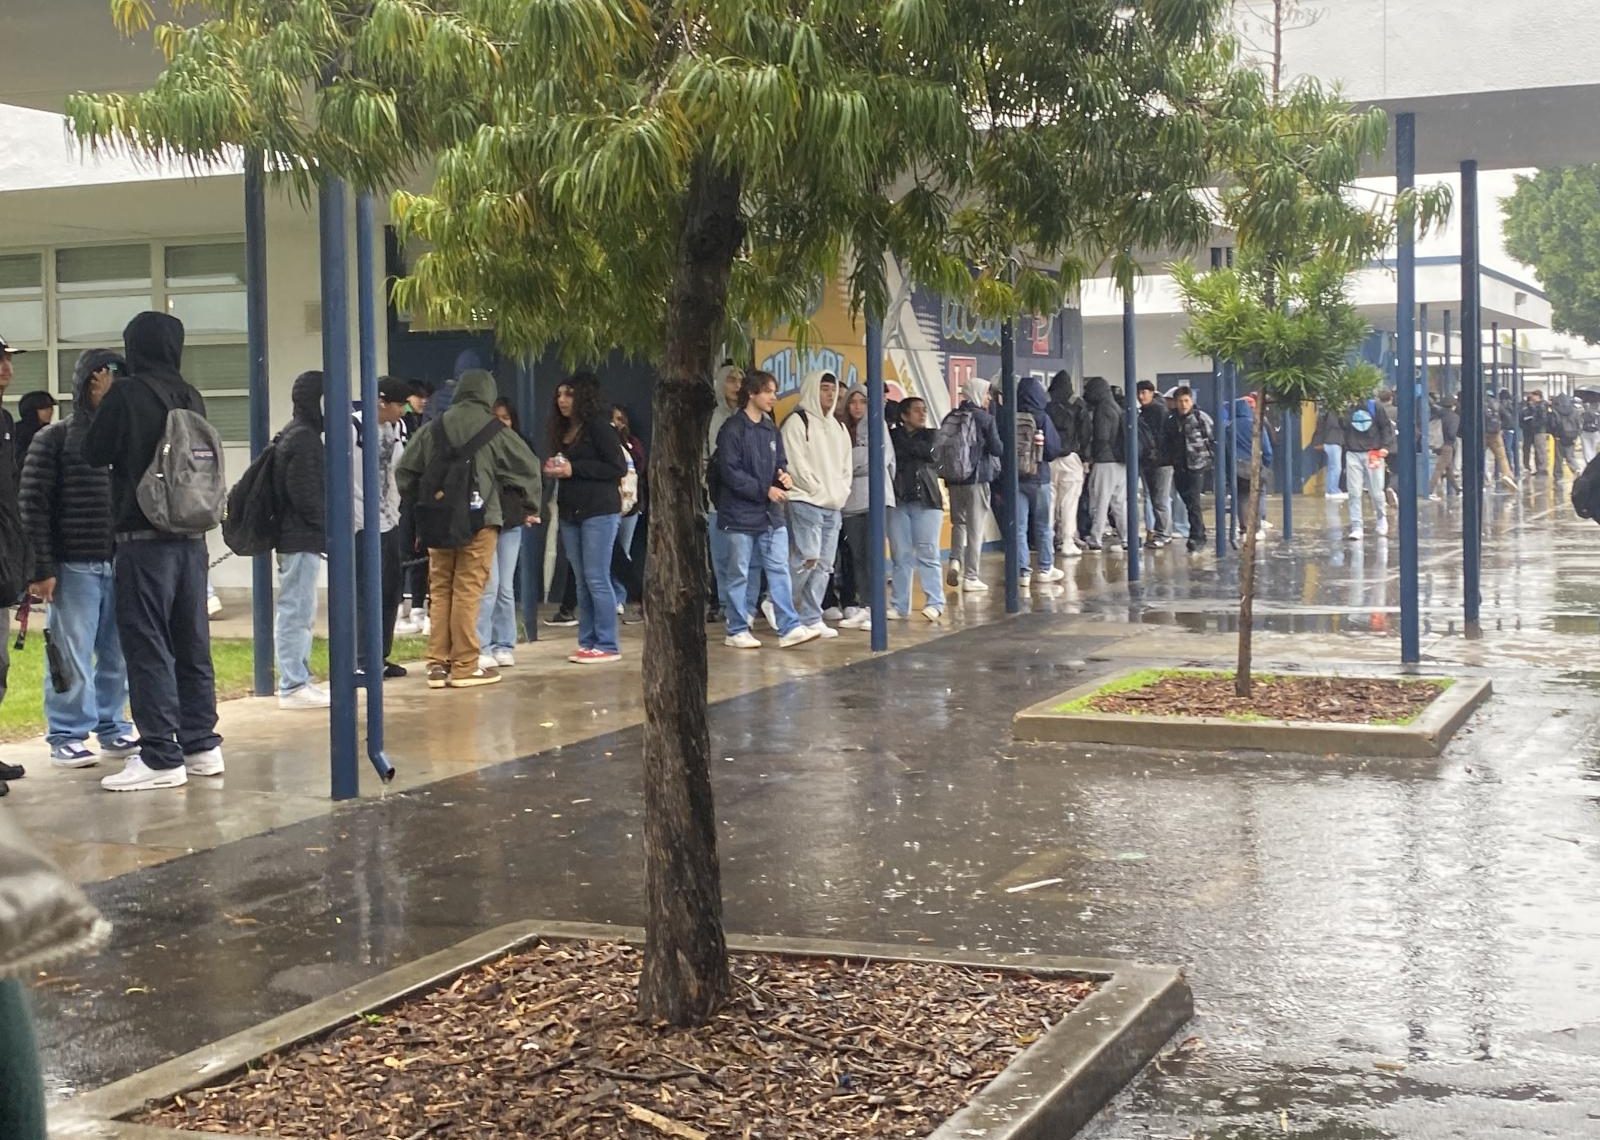 On Jan. 1, students near the quad and 200 building hide under the hallways as it provides cover from the pouring rain. In the recent week, multiple rainfall has been recorded causing flooding in San Diego and schools like Bonita Vista High (BVH).